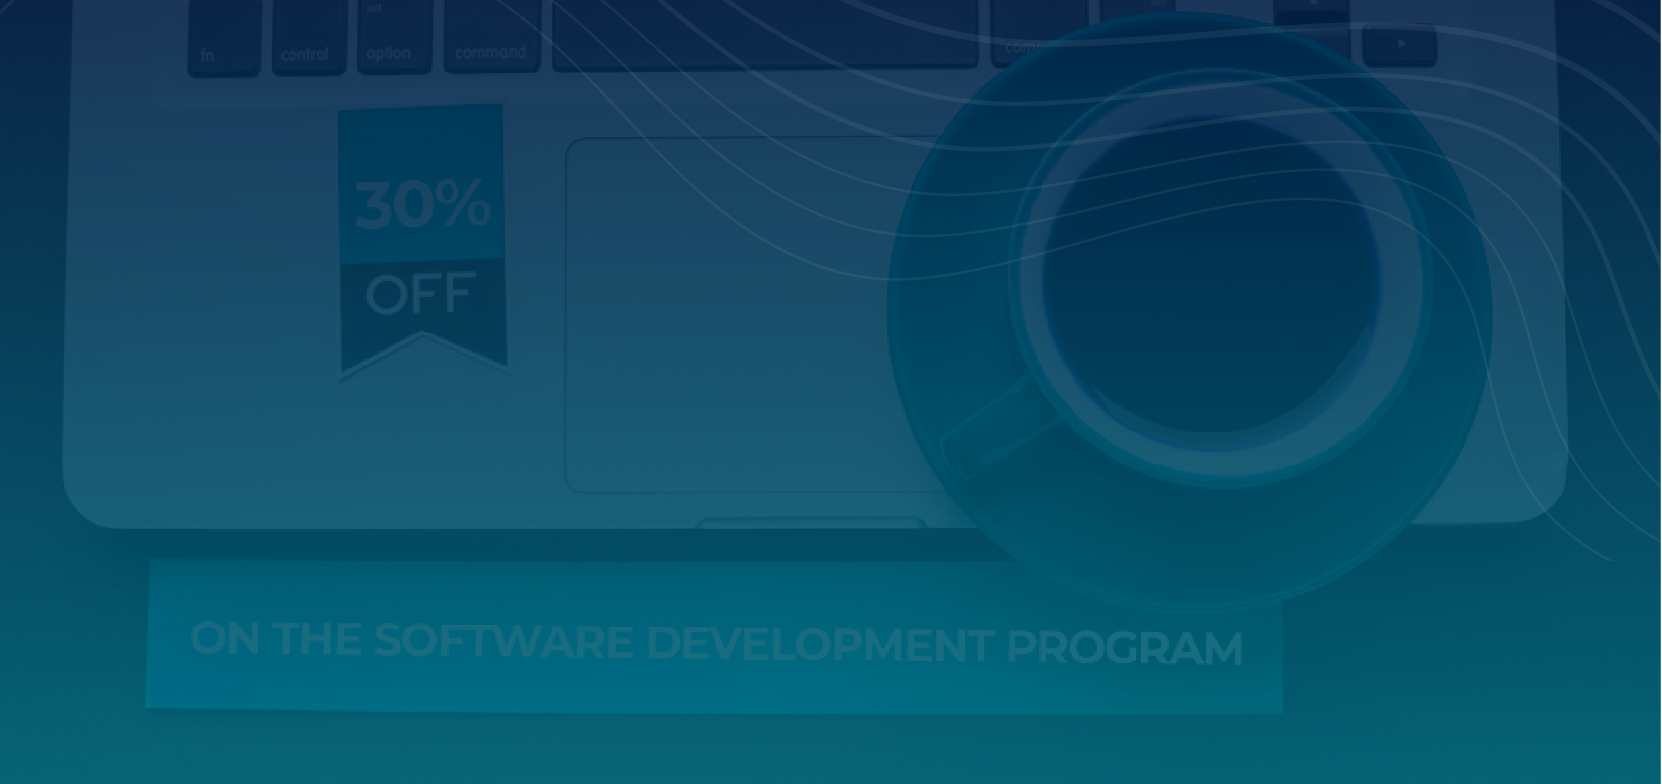 Limited, One-Time-Only Launch Discount for Our Software Development Program